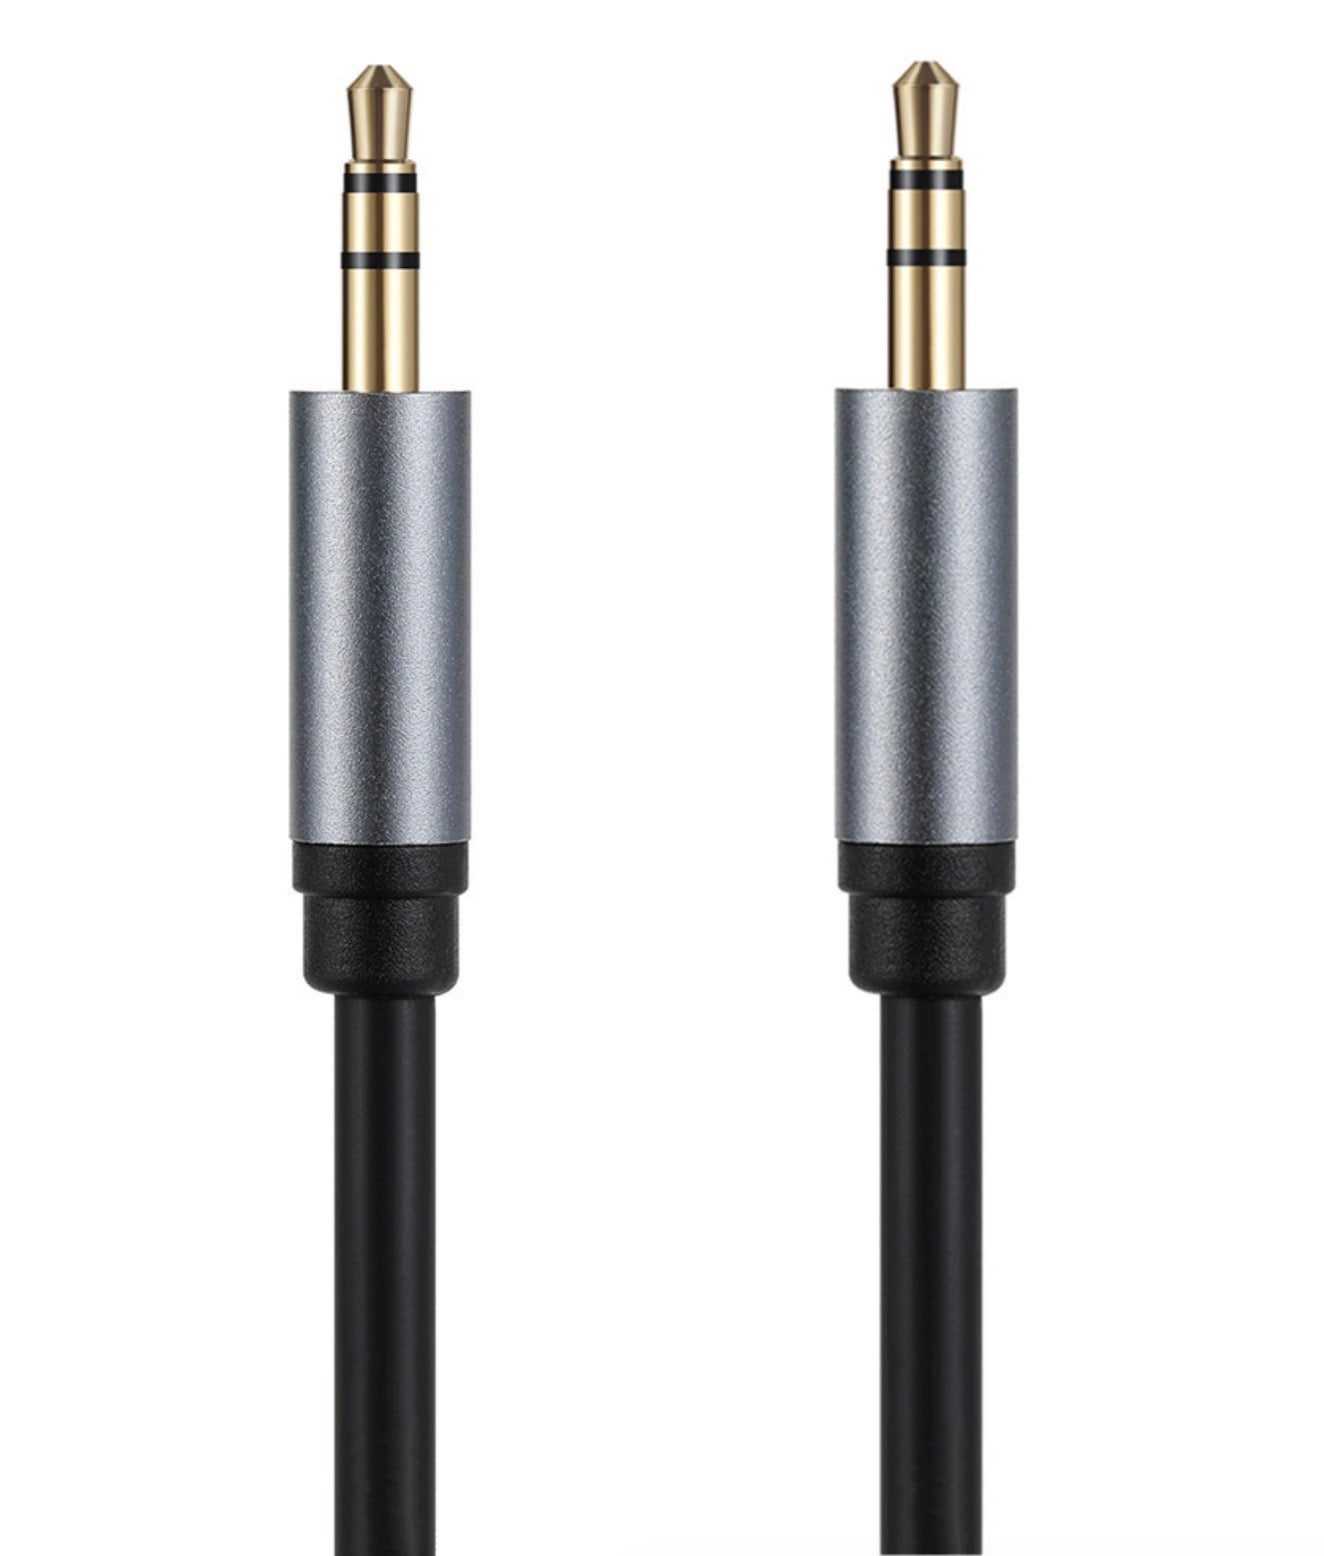 1/8" 3.5mm 3 Pole Male to 3.5mm 3 Pole Male Audio Auxiliary Cable